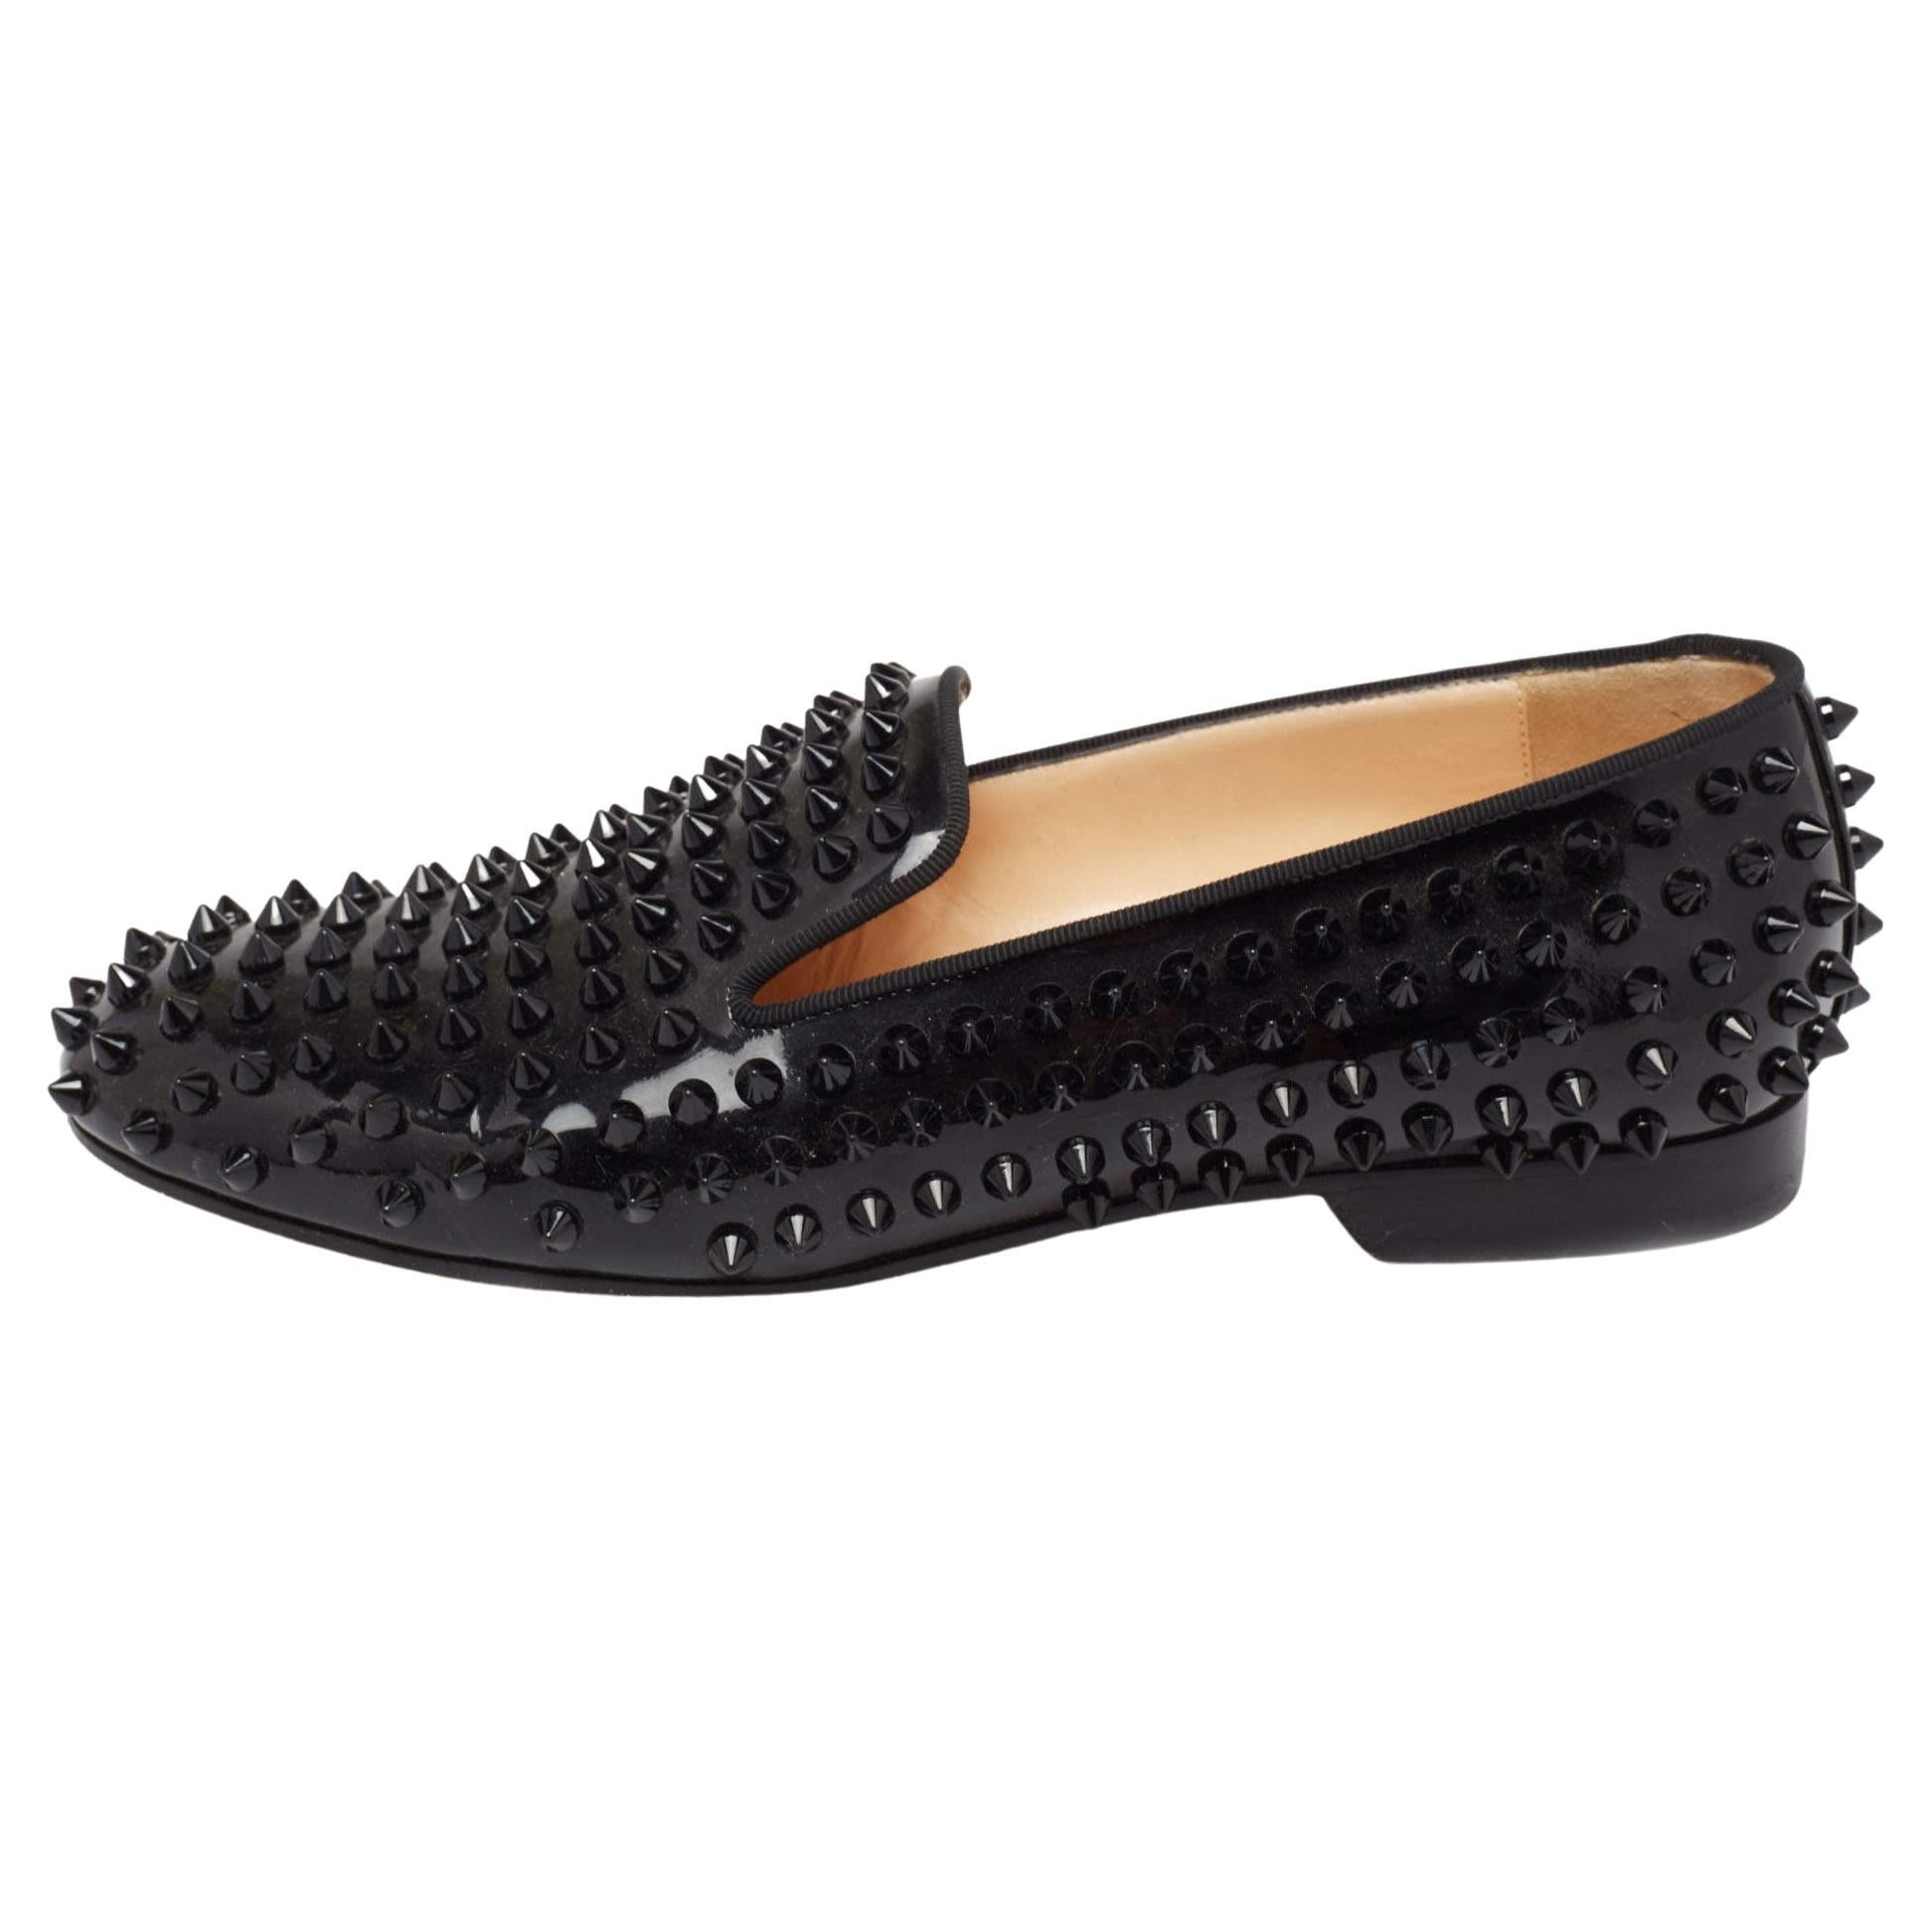 Christian Louboutin Patent Leather Dandelion Spikes Smoking Slippers Size 37 For Sale